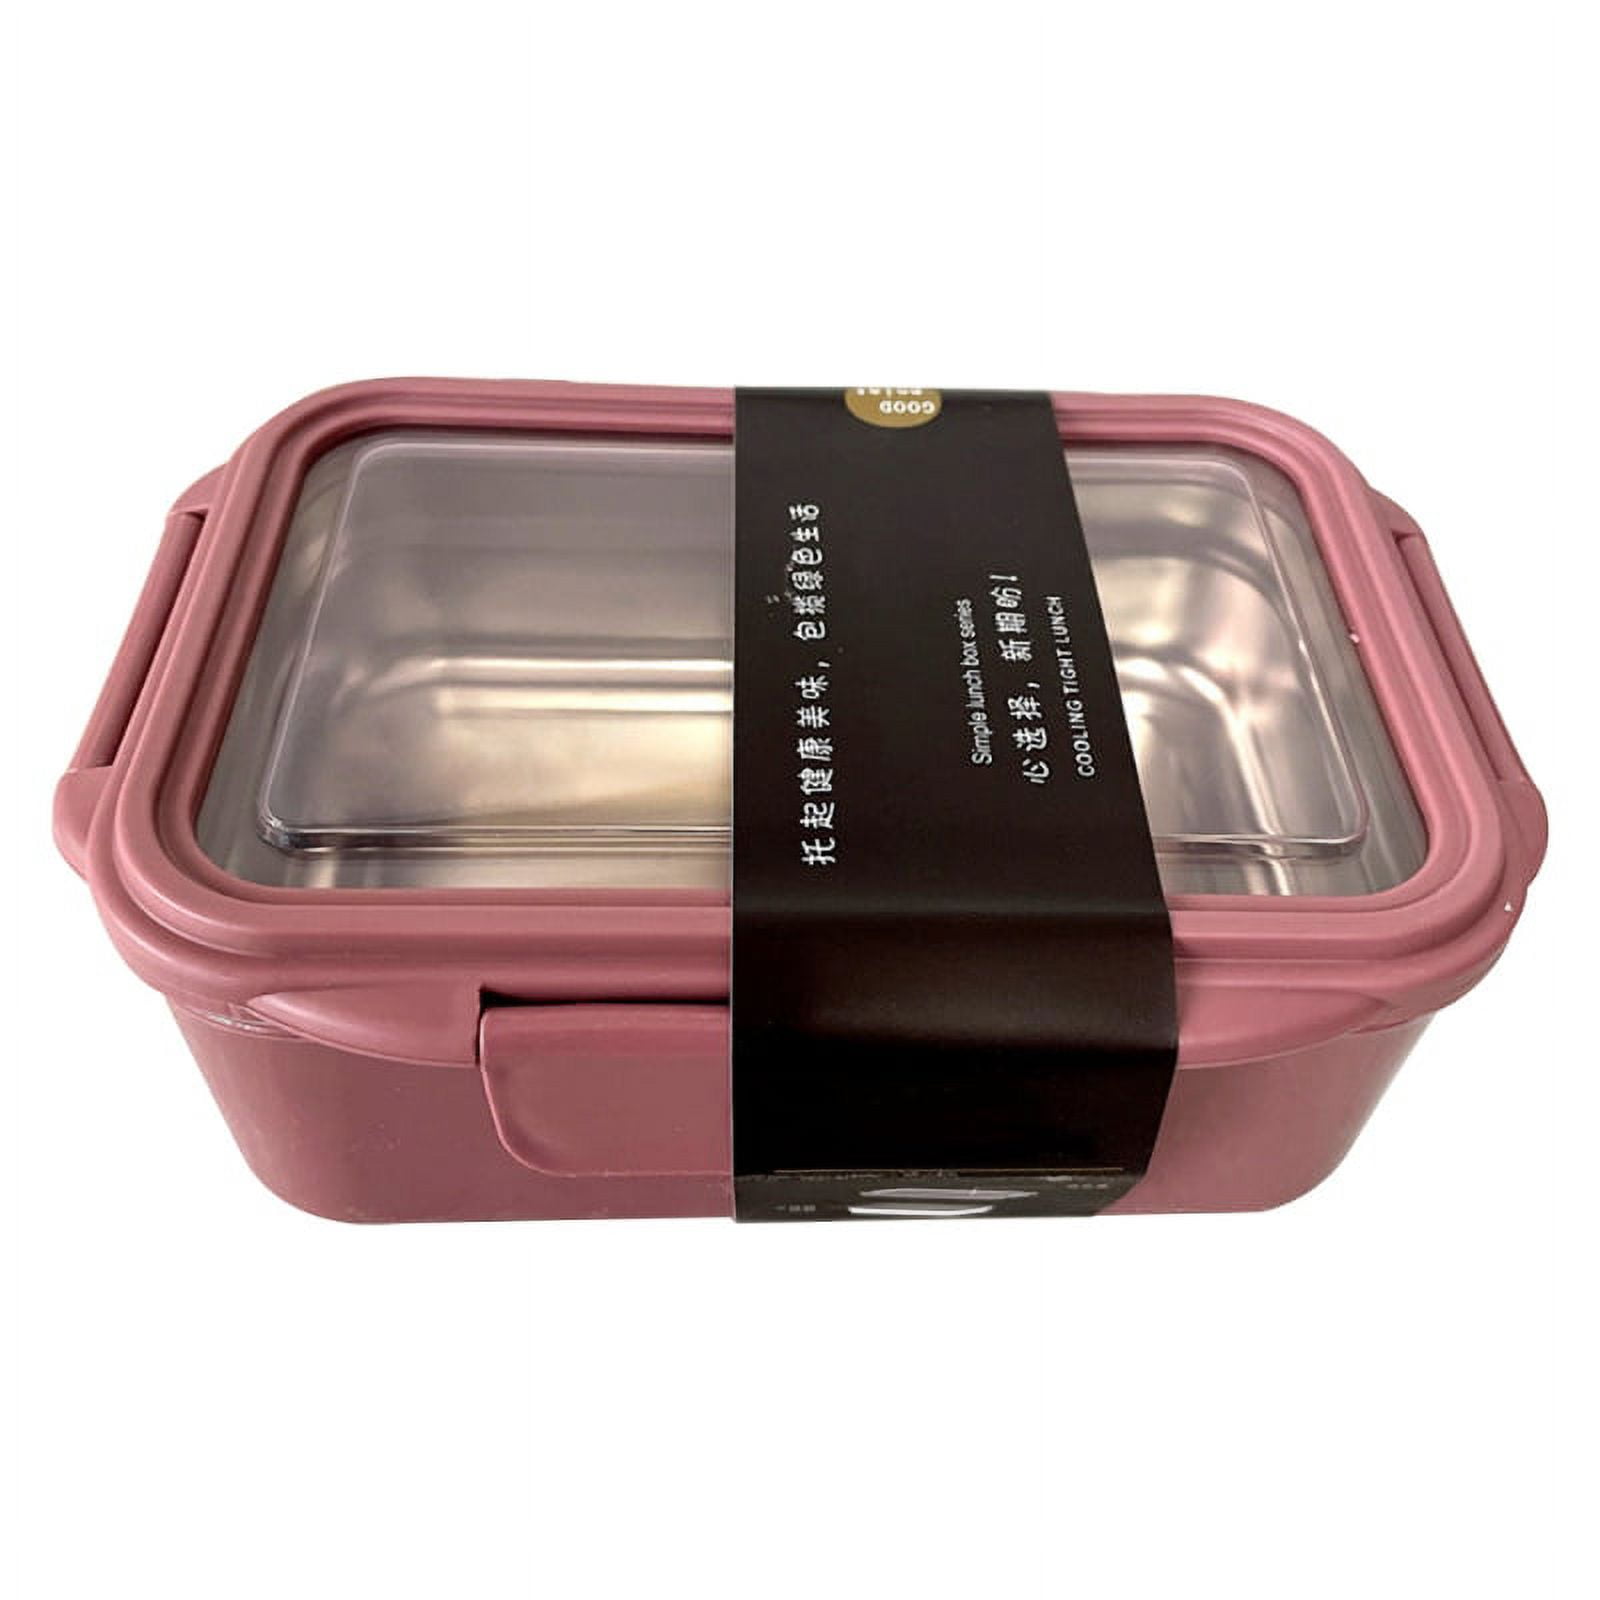 GENEMA Stainless Steel Lunch Box Primary School Lunch Box Office Worker  Lunch Insulated Lunch Boxes Rectangular Insulated Bowls